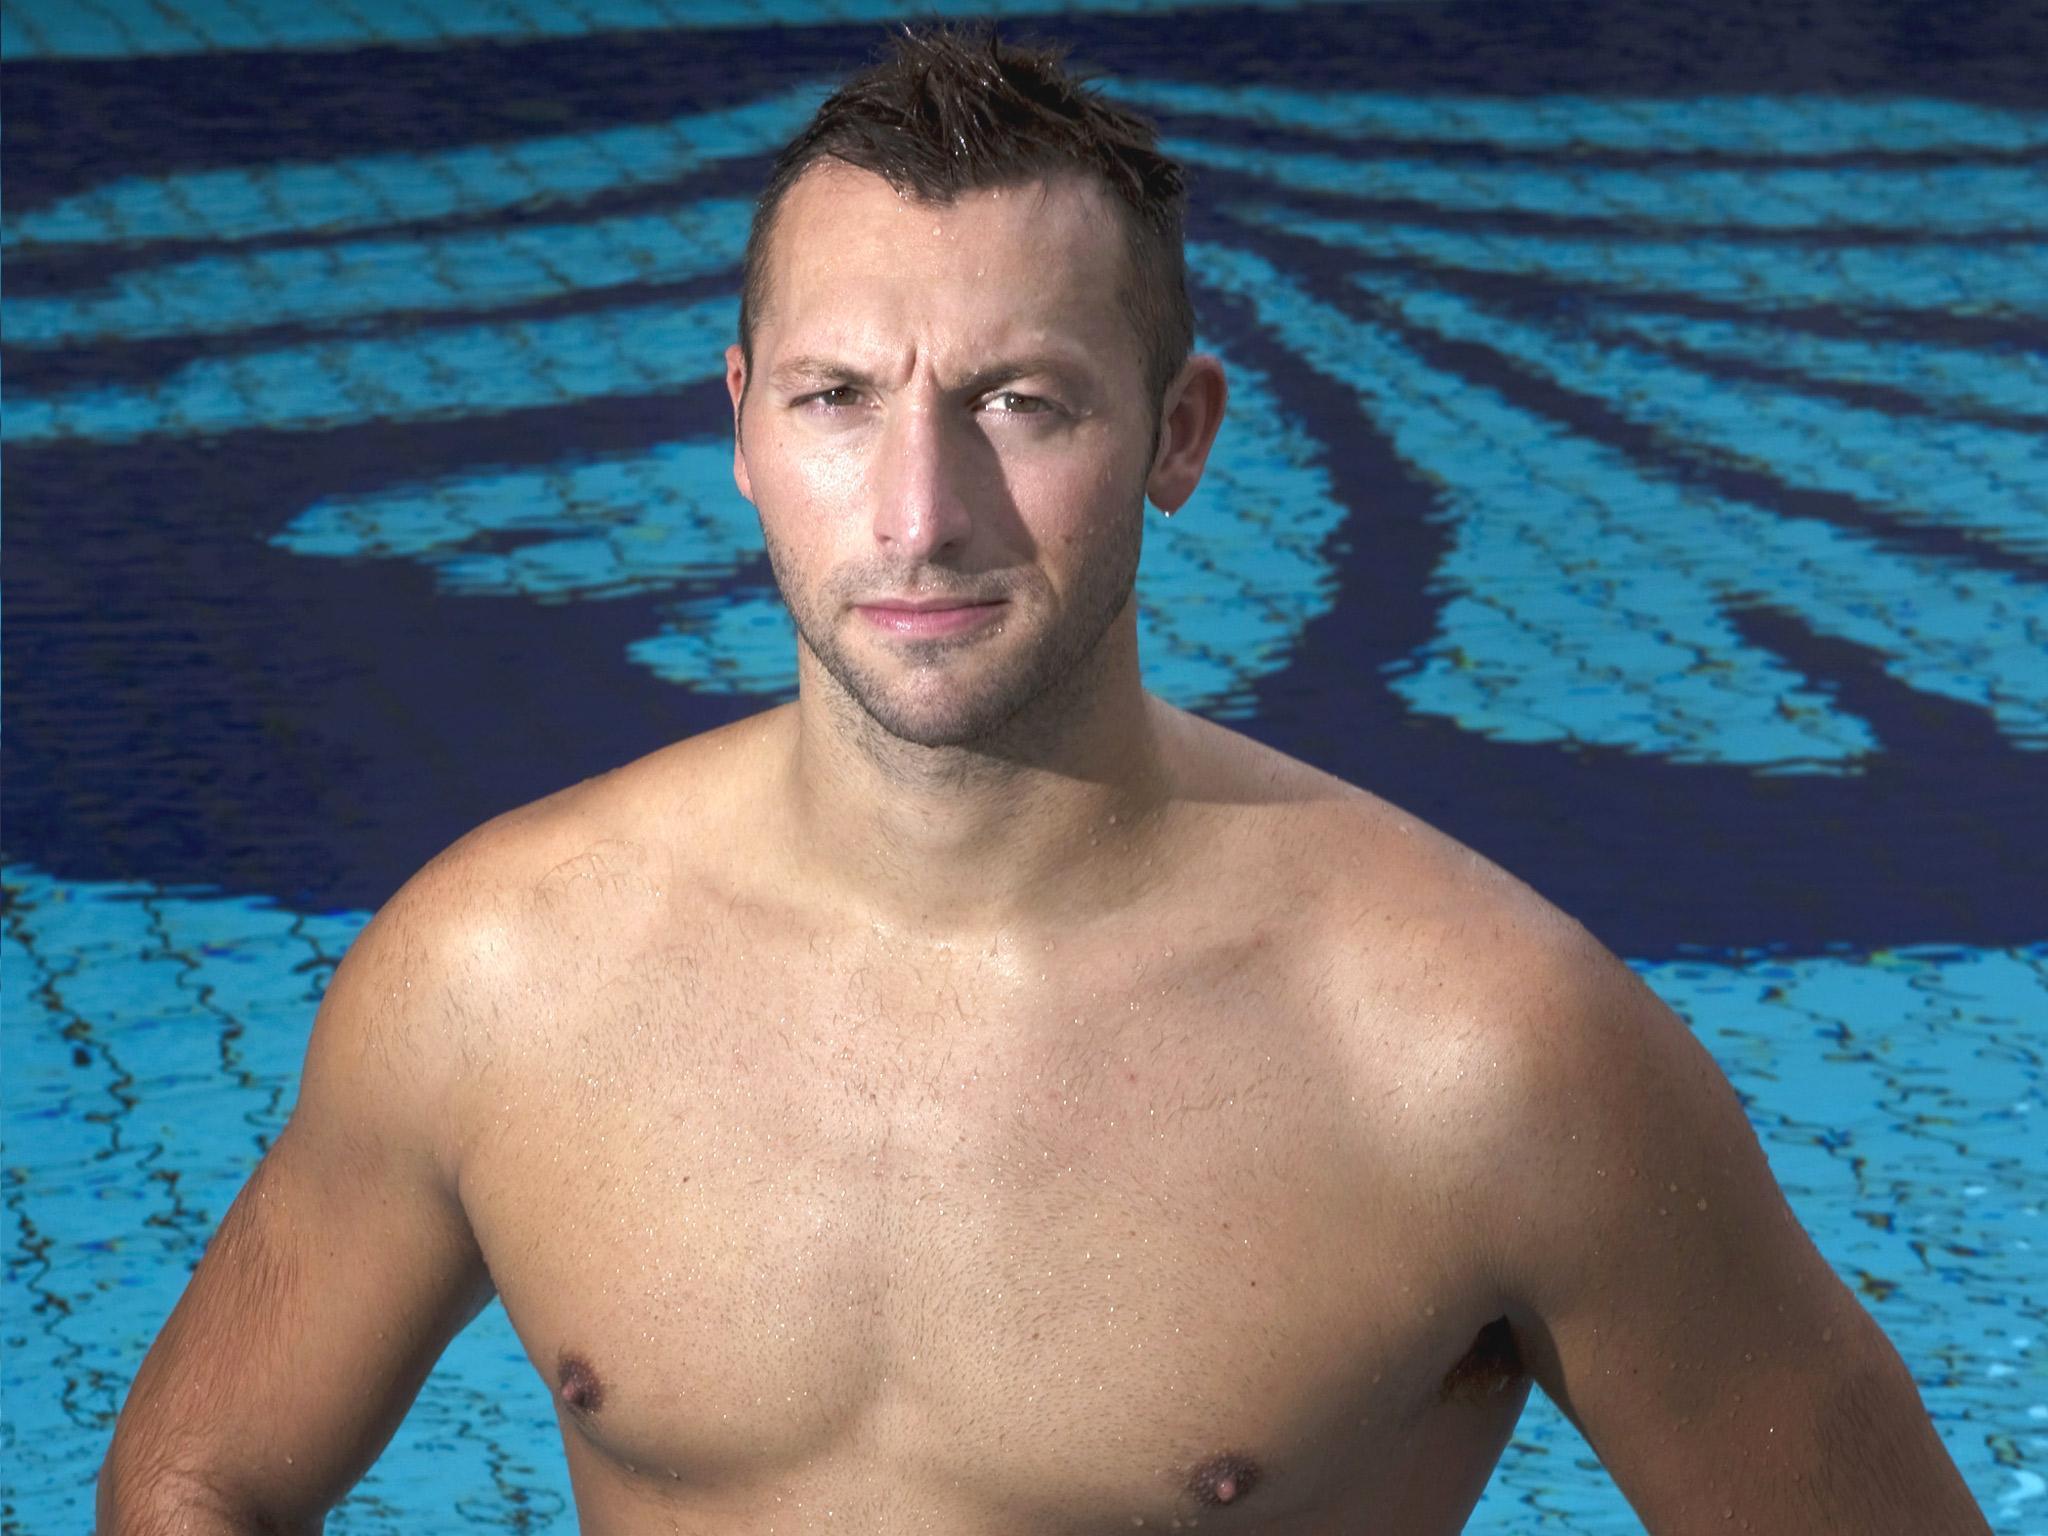 Swimmer Ian Thorpe of Australia (Source: The Independent)